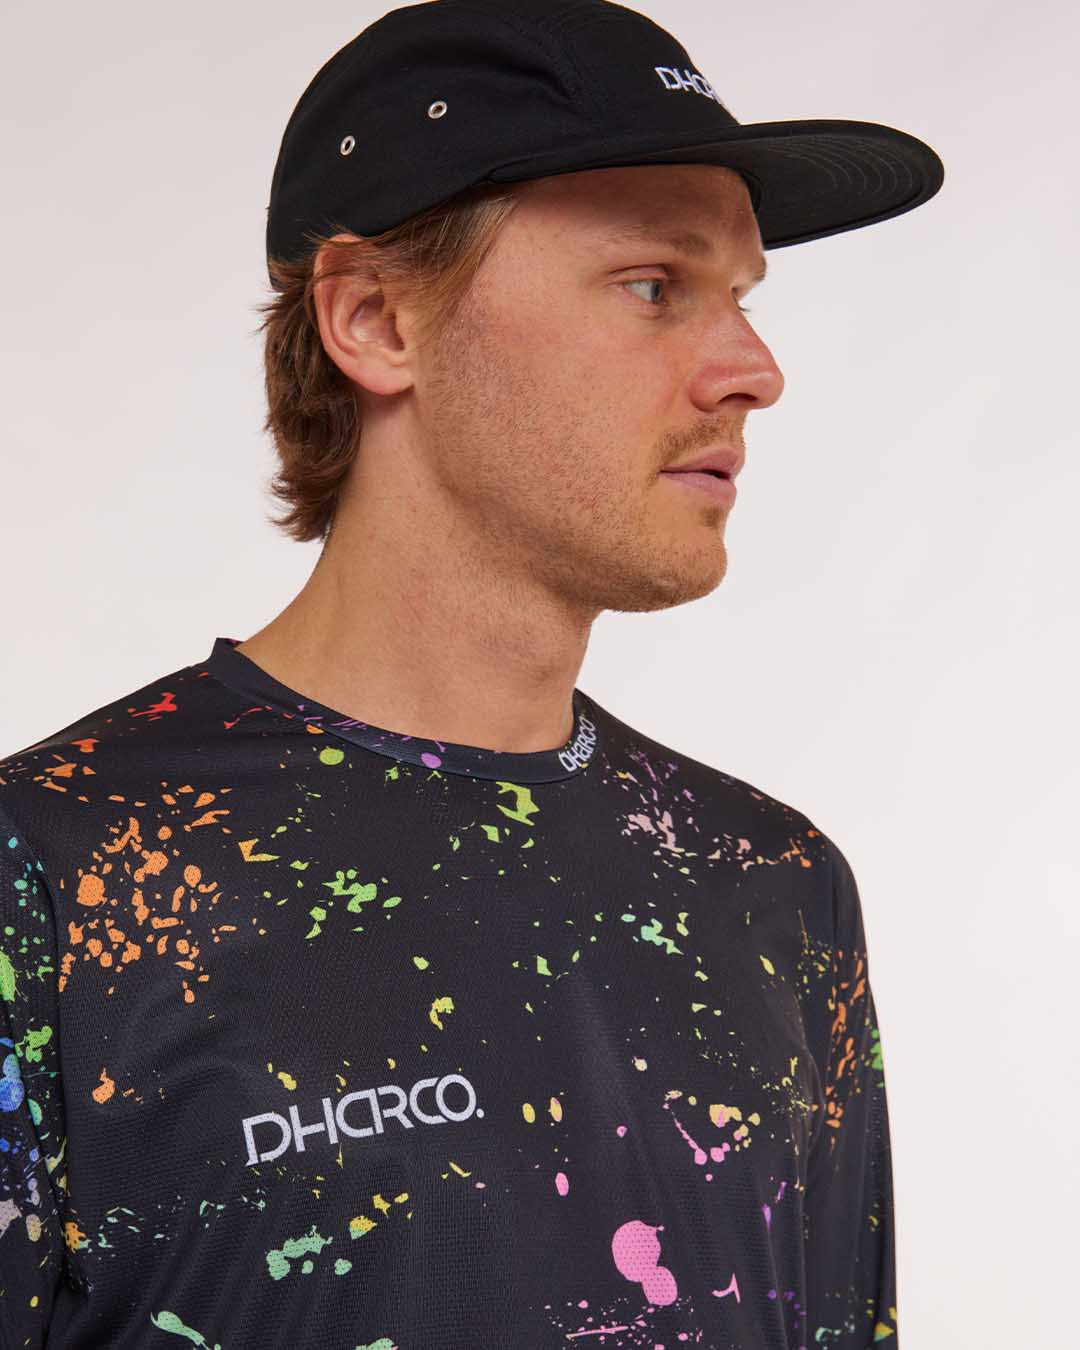 DHaRCO Mens Race Jersey